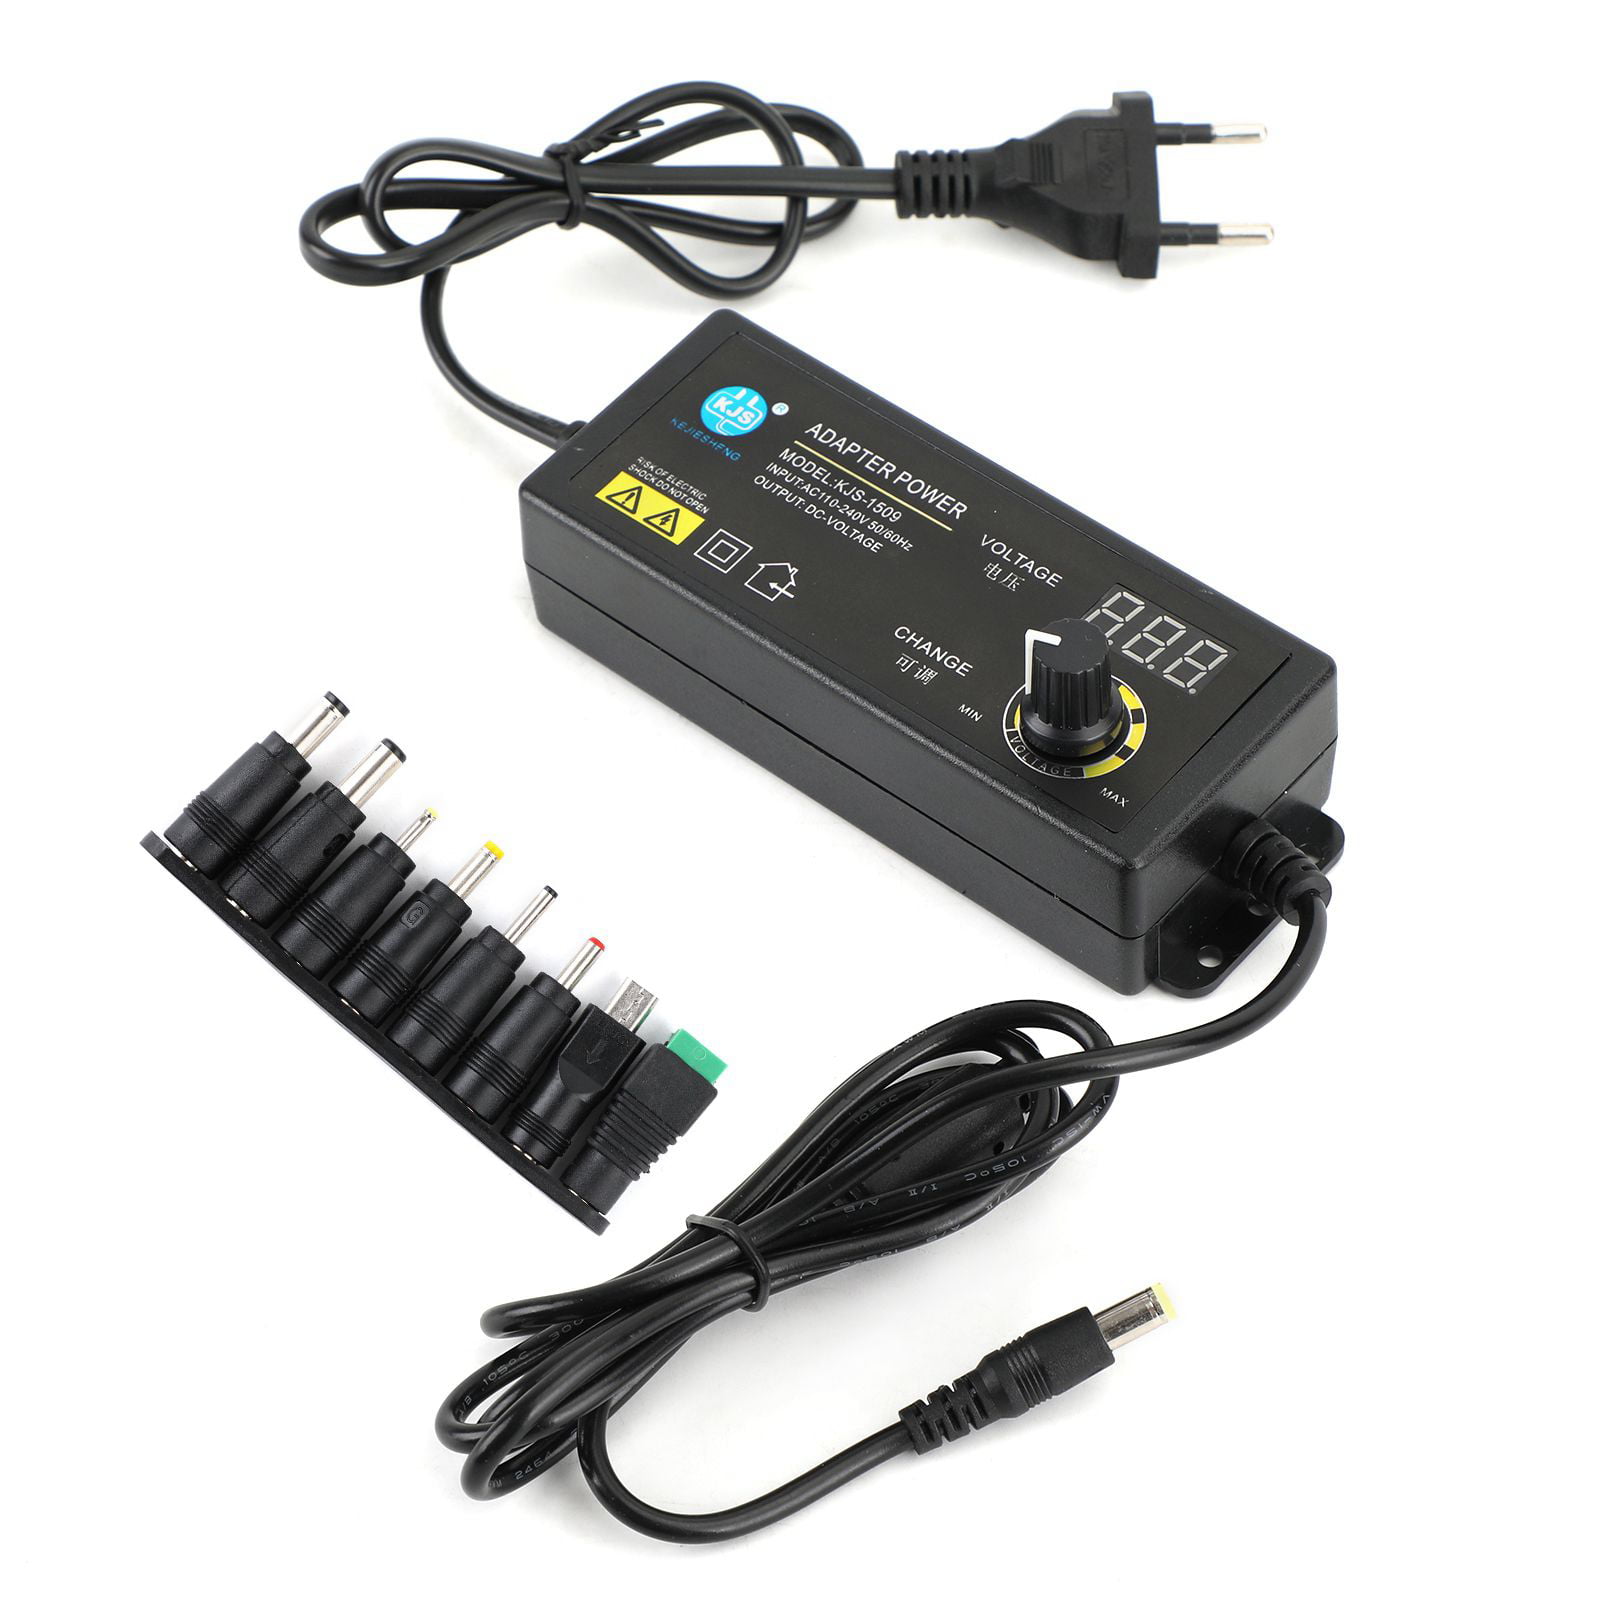 Adjustable Power Supply Adapter 3V-24V 2.5A 60W Controller LCD Display 8 Plugs 